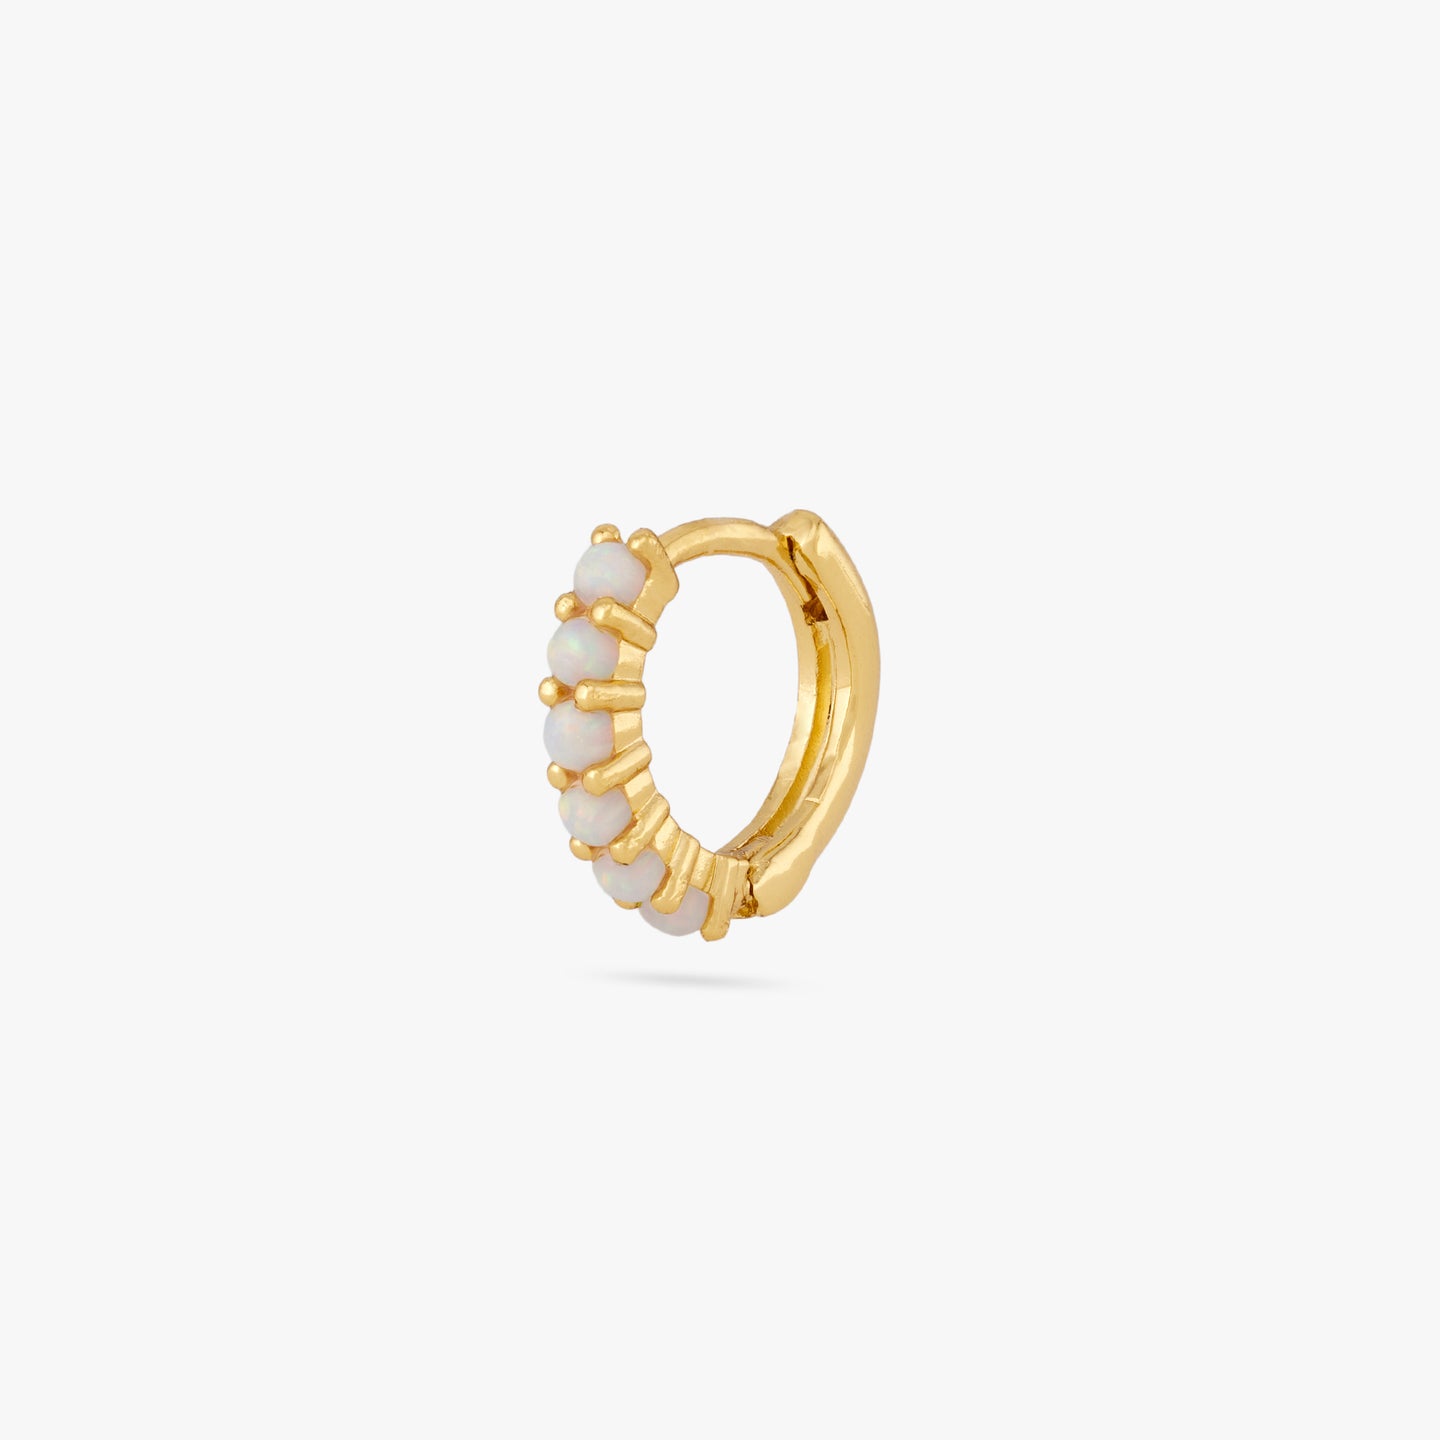 This is a gold huggie with large opal pavé color:null|gold/opal